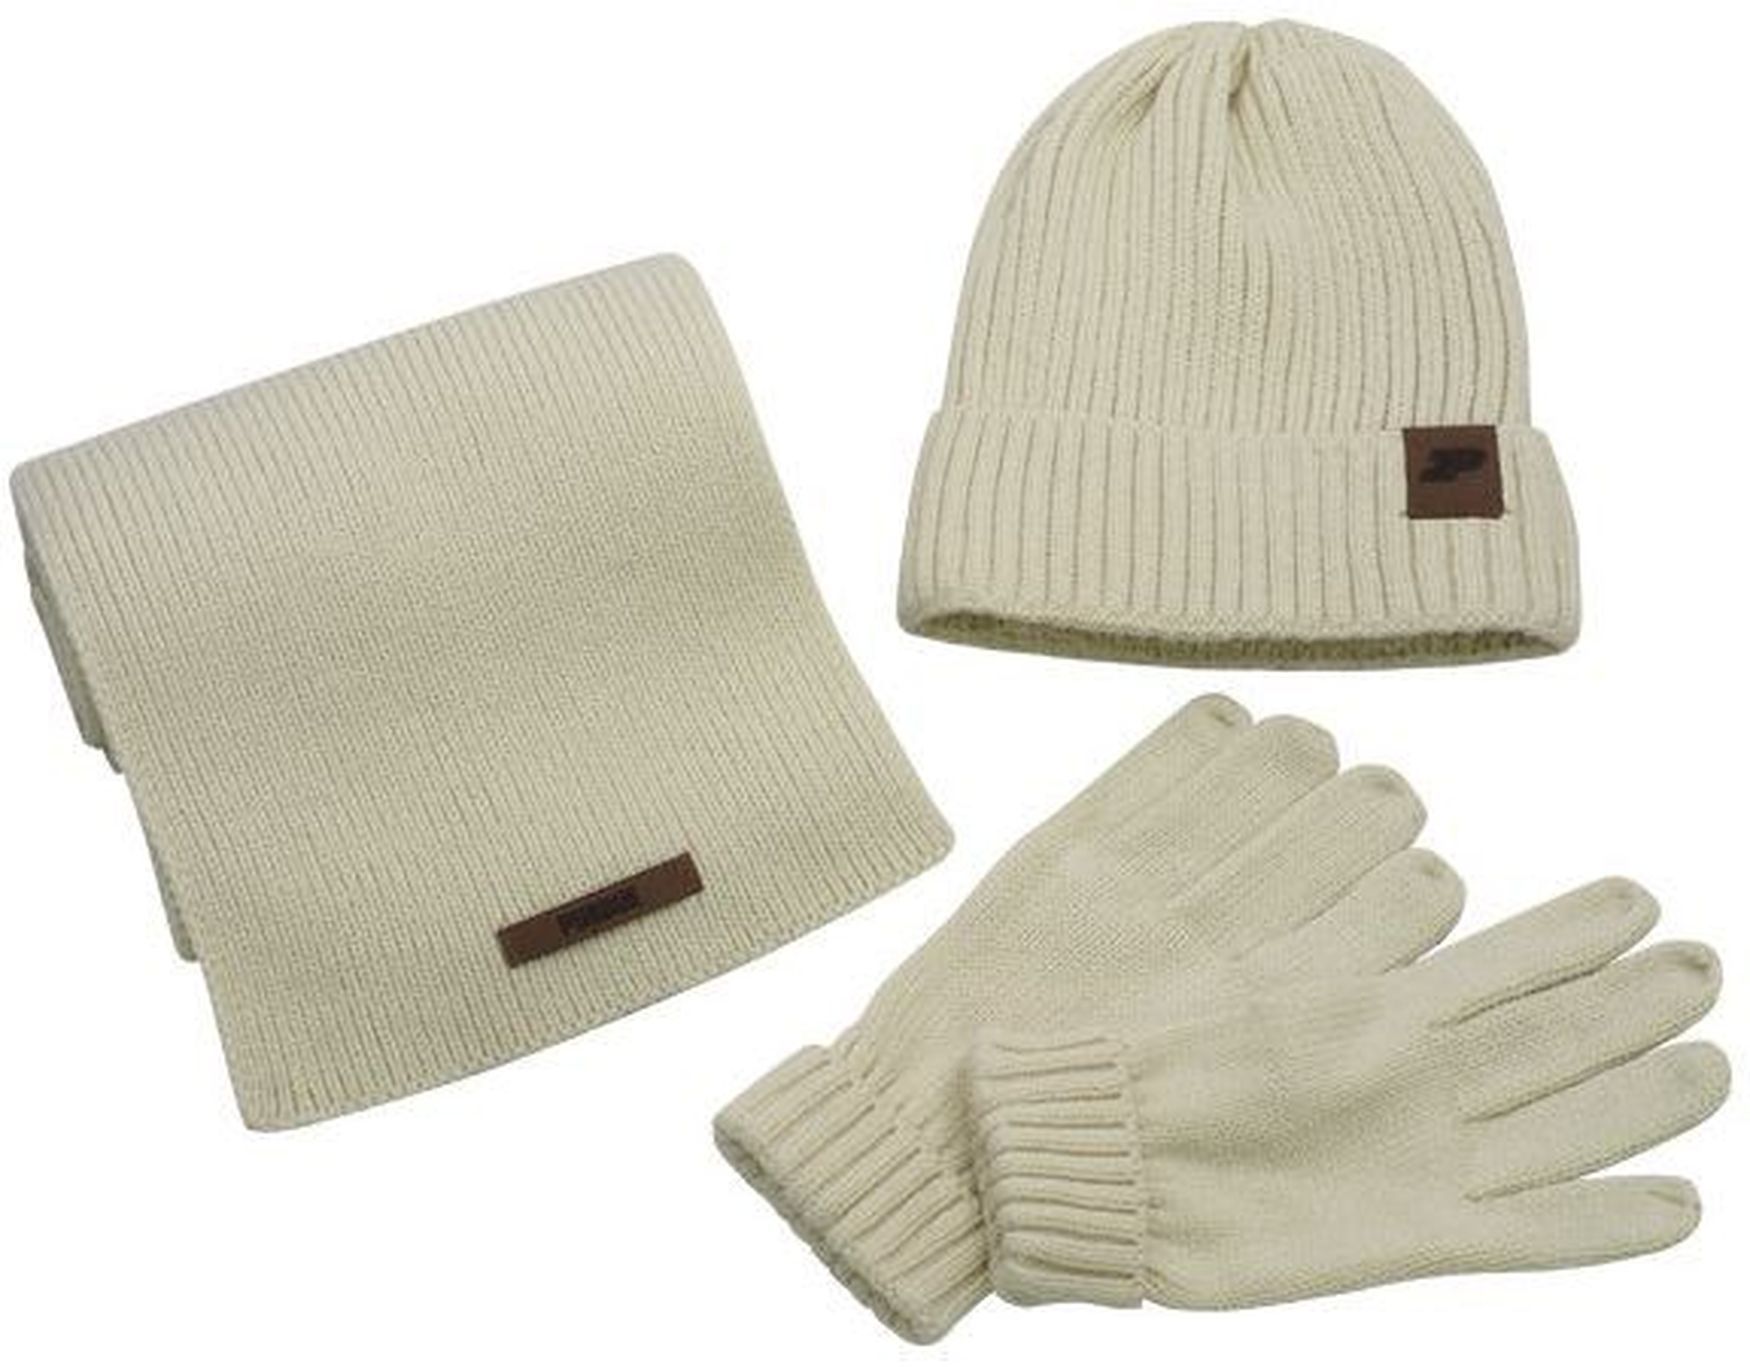 Deluxe Cable Acrylic Knit Winter Beanie Glove and Scarf Set